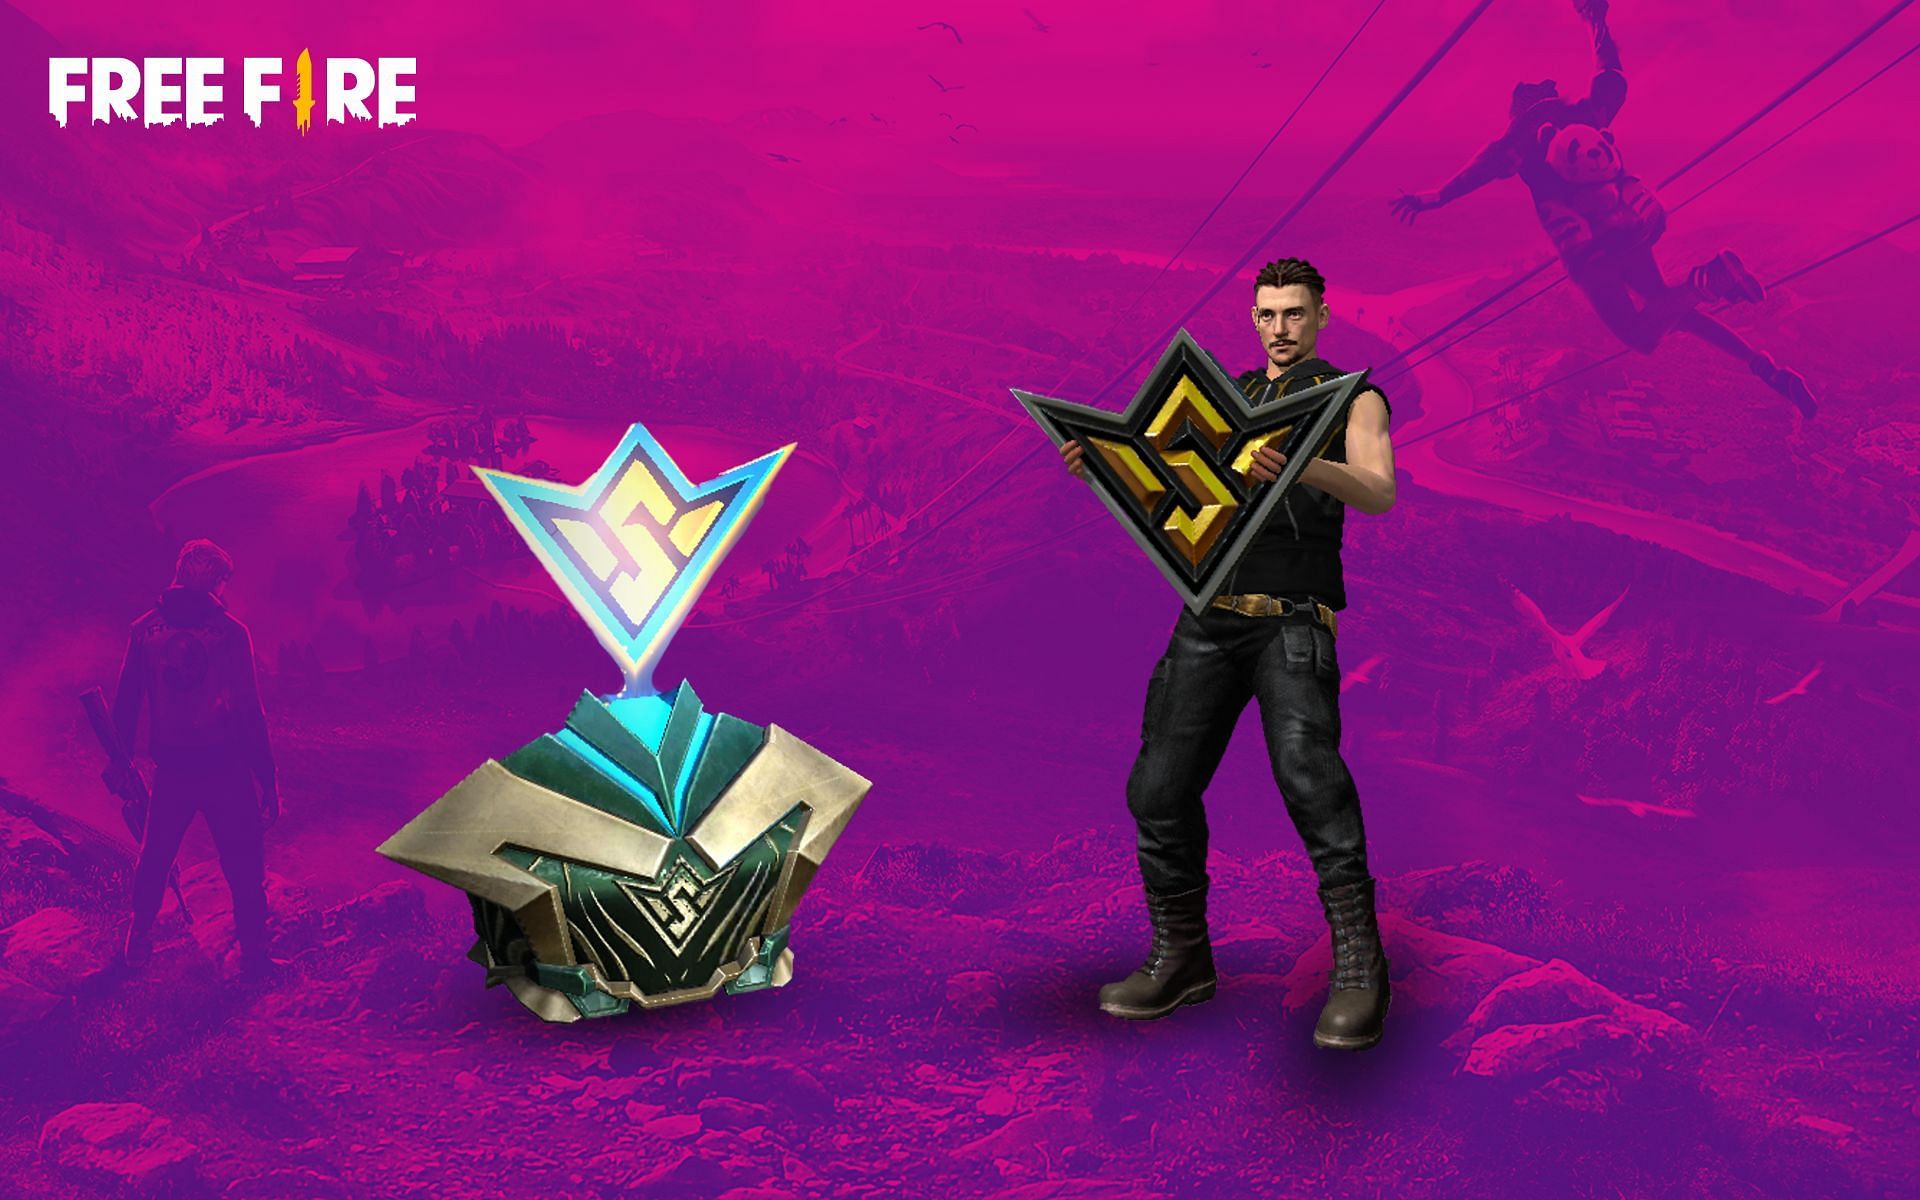 The new Free Fire MAX event has a legendary emote and loot box for free (Image via Sportskeeda)